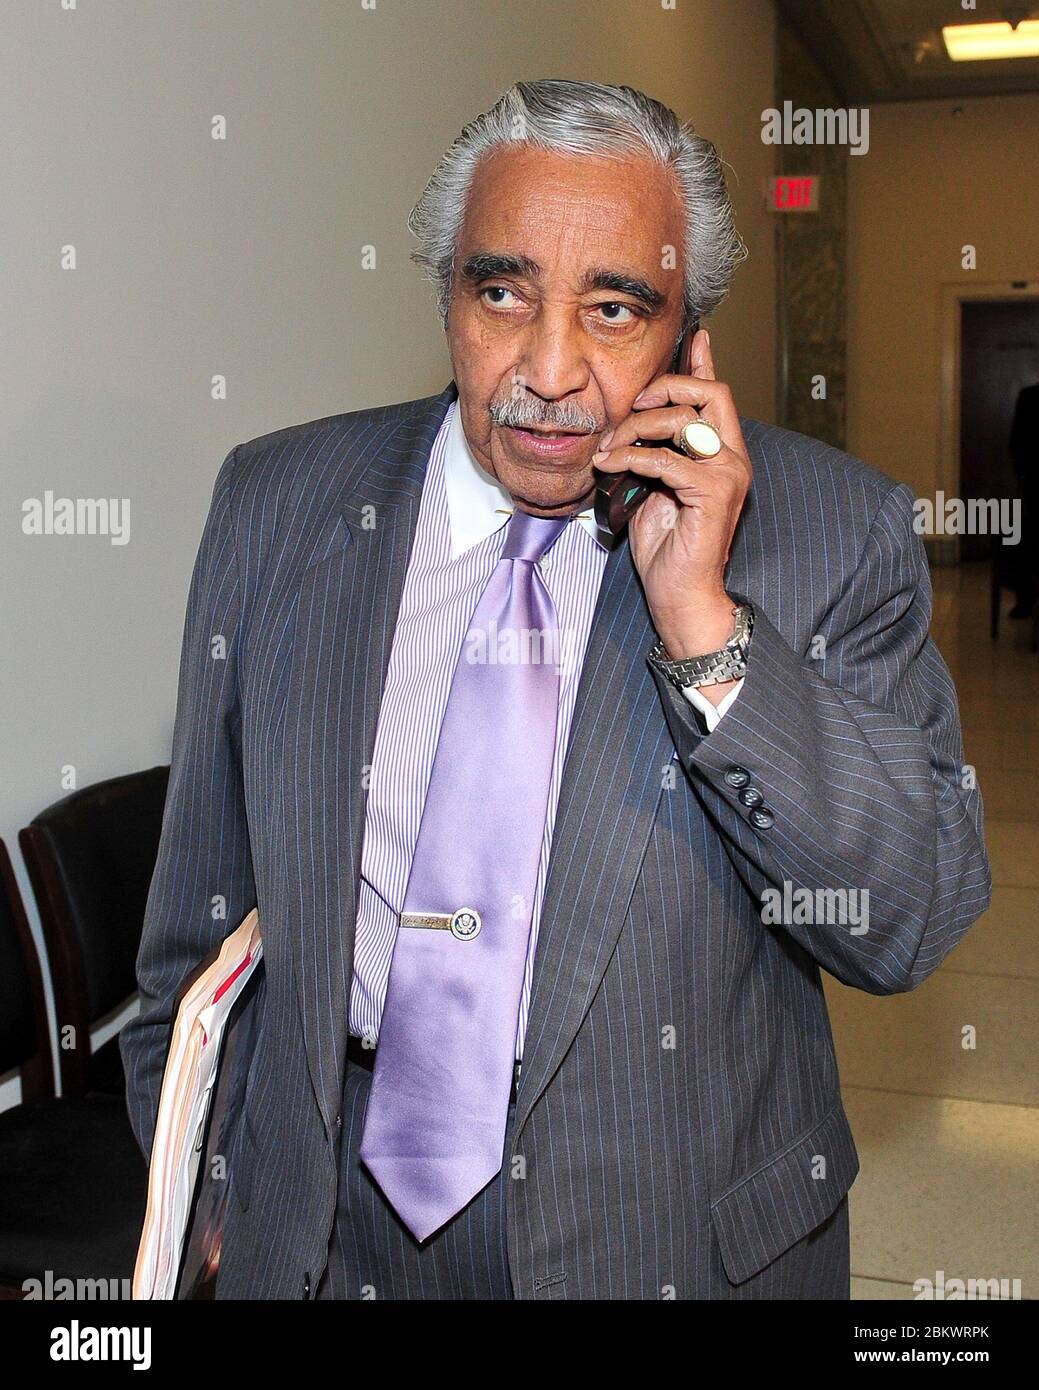 United States Representative Charlie Rangel (Democrat of New York) returns to his Capitol Hill office on Tuesday, November 30, 2010.Credit: Ron Sachs / CNP  (RESTRICTION: NO New York or New Jersey Newspapers or newspapers within a 75 mile radius of New York City) / MediaPunch Stock Photo